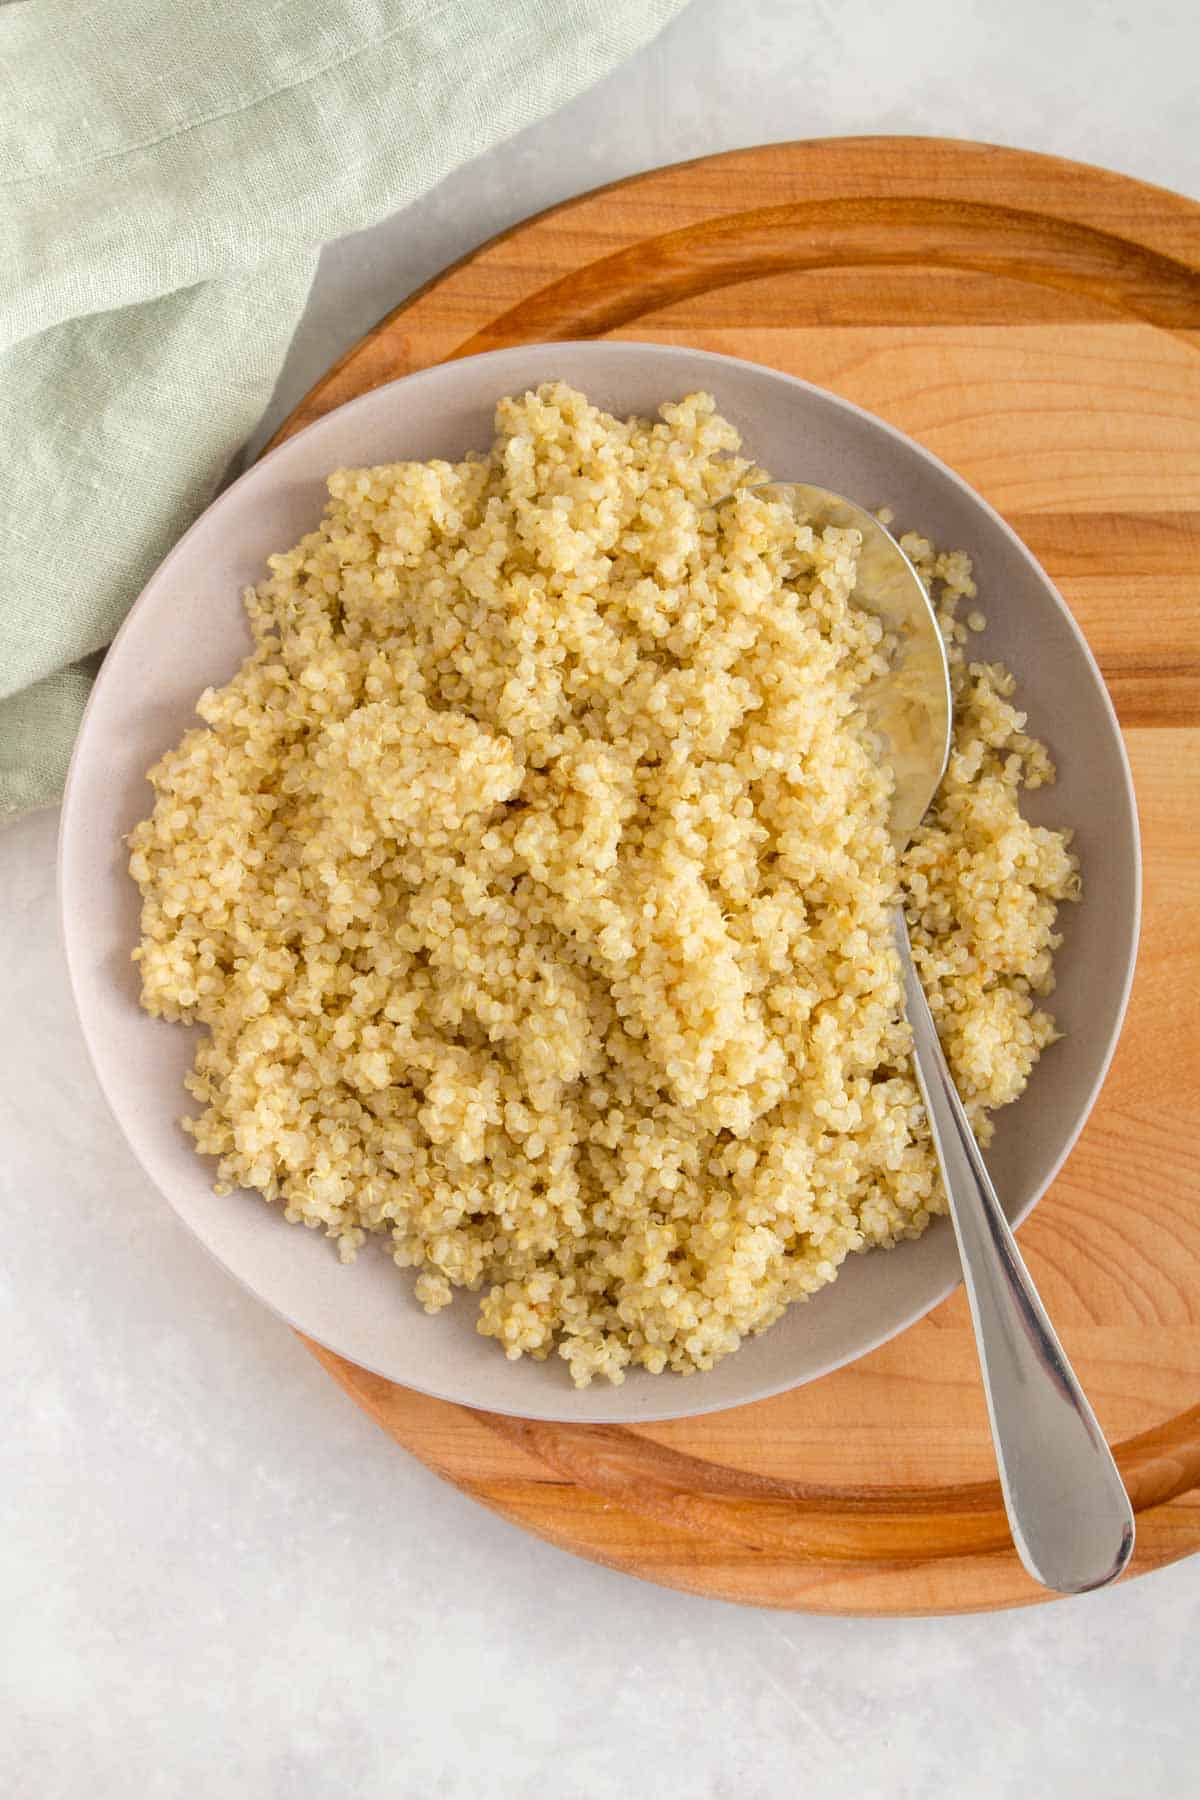 A plate of quinoa with a spoon.